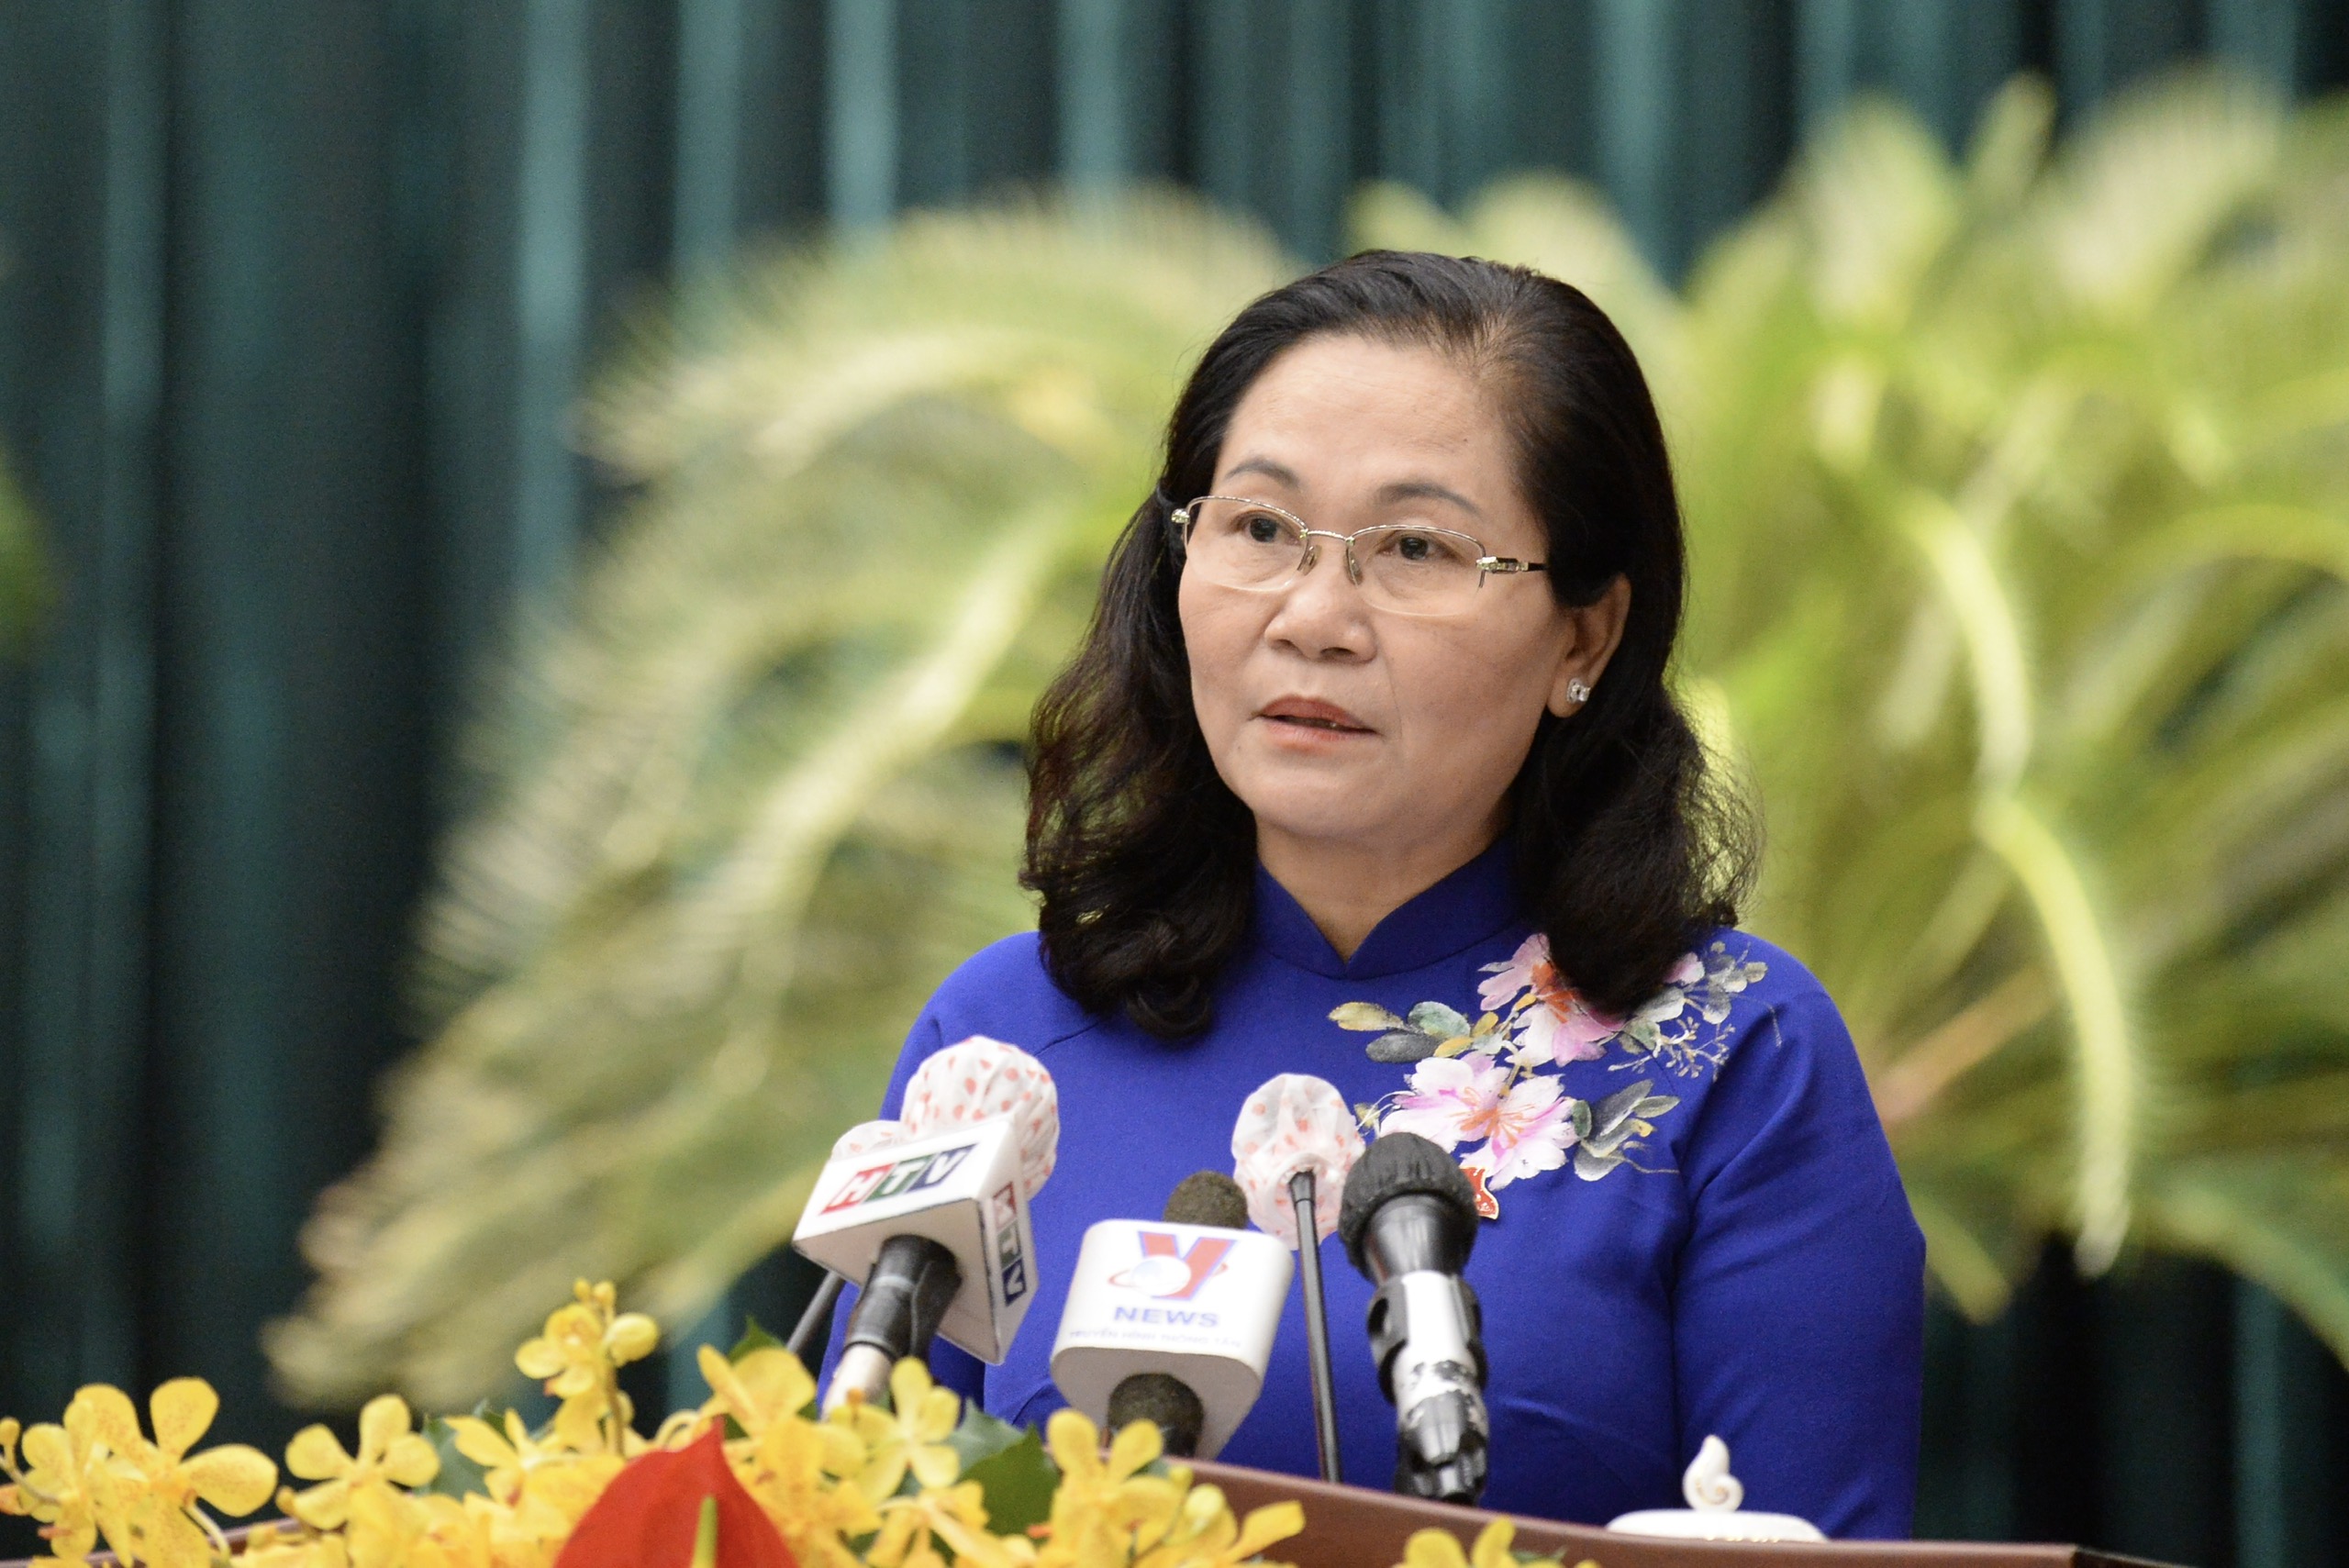 COVID-19 pandemic costs Ho Chi Minh City over $11.8bn: chairwoman